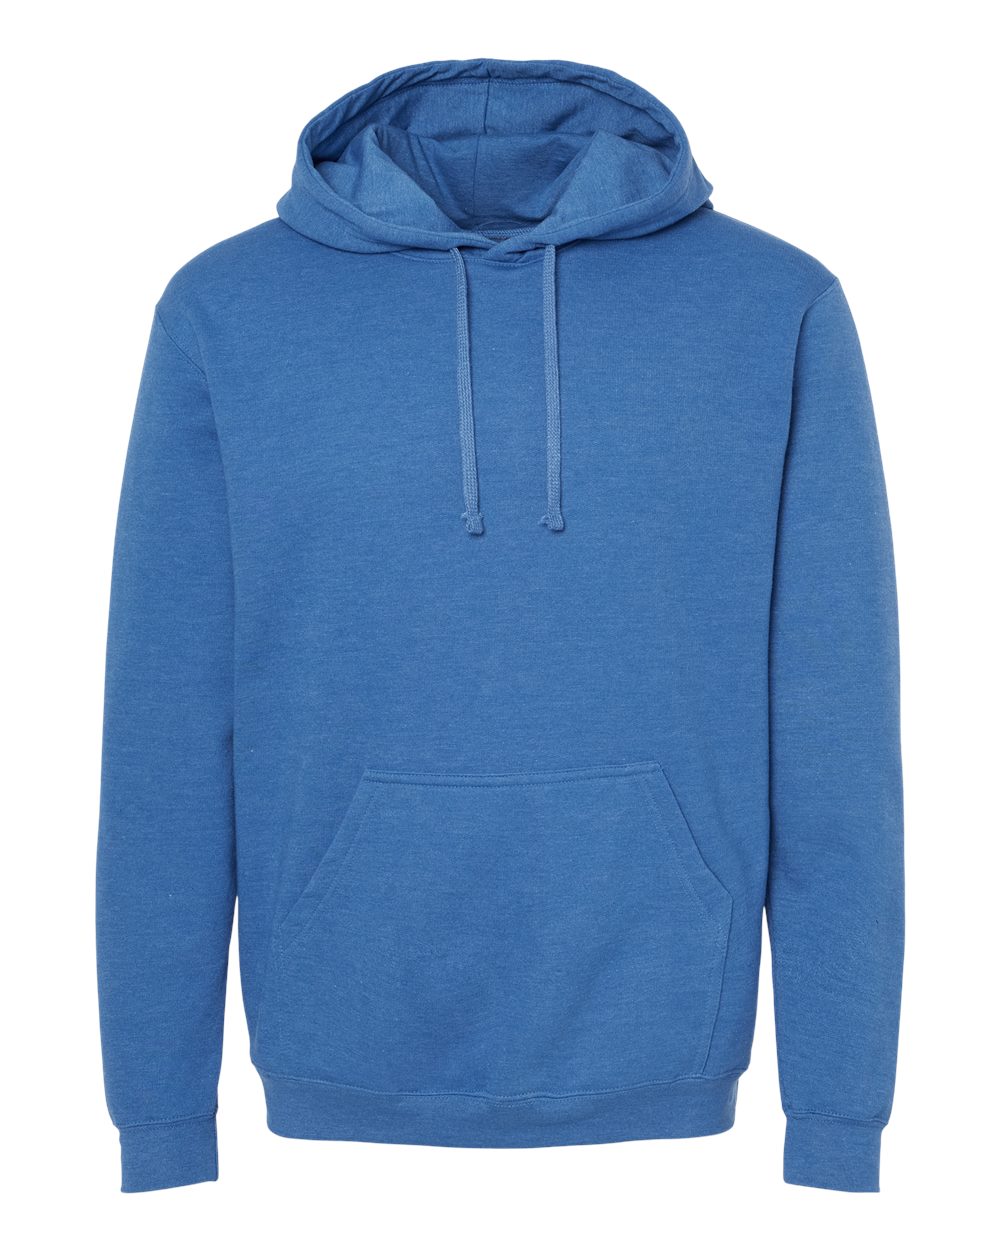 M&O Unisex Pullover Hoodie 3320 #color_Heather Royal